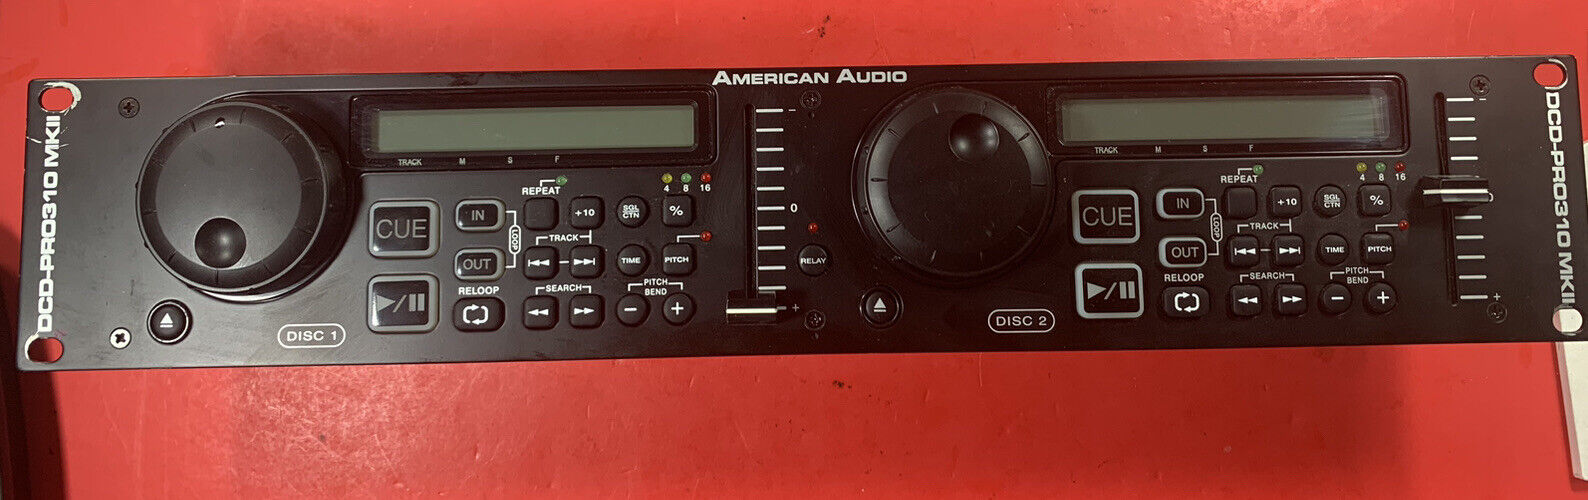 American Audio Dcd-pro310 Mkii Dual Compact Disc Player Working Free S&h!